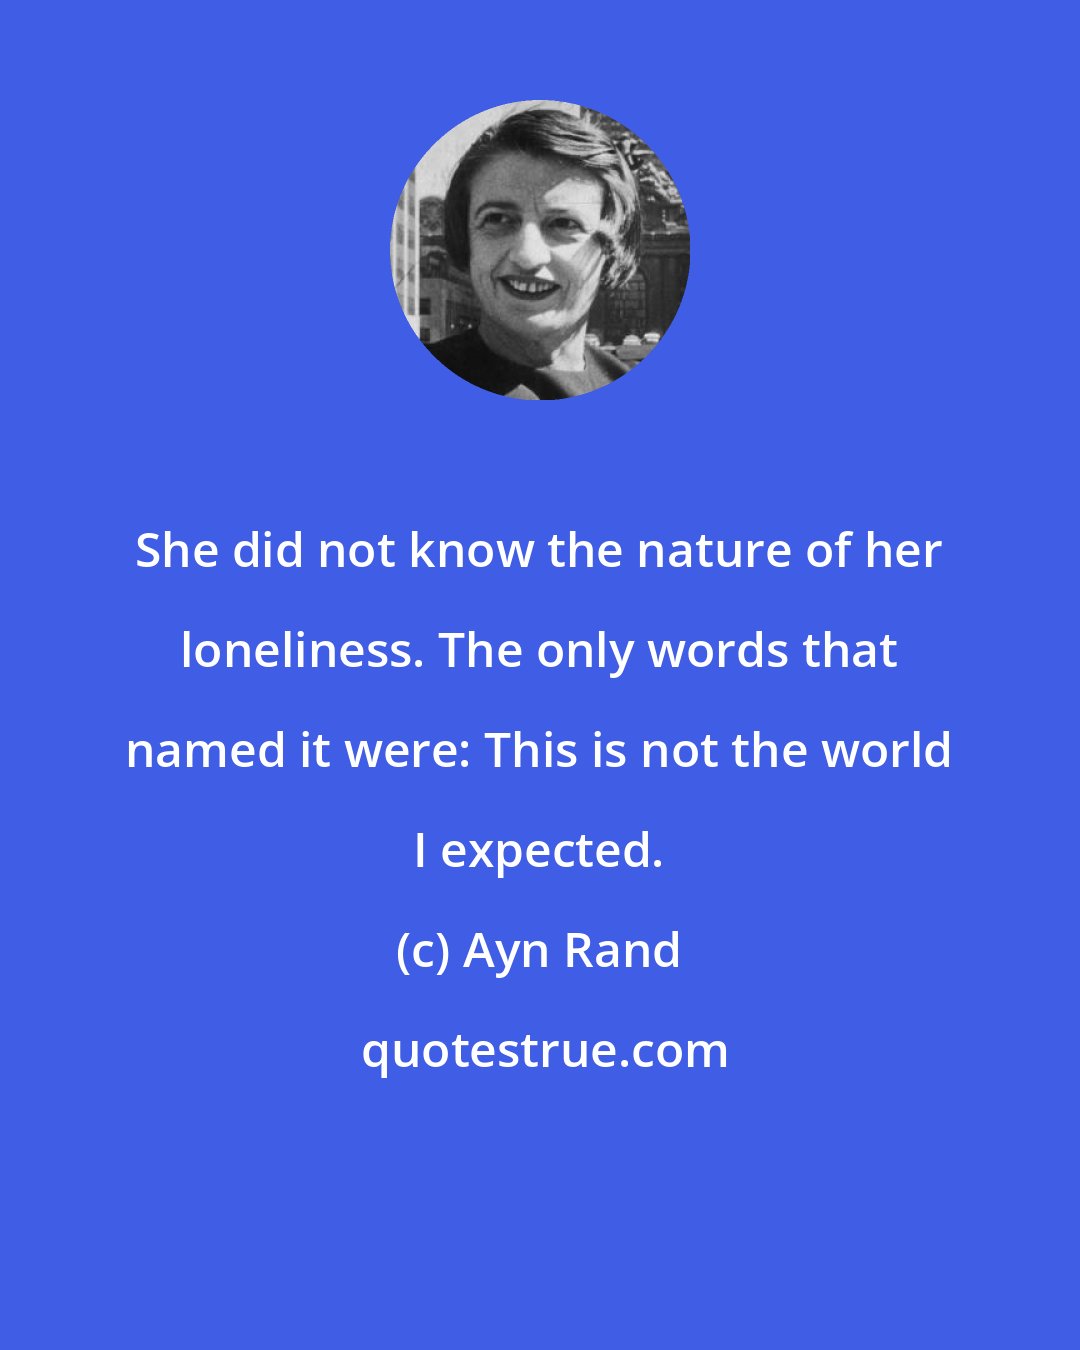 Ayn Rand: She did not know the nature of her loneliness. The only words that named it were: This is not the world I expected.